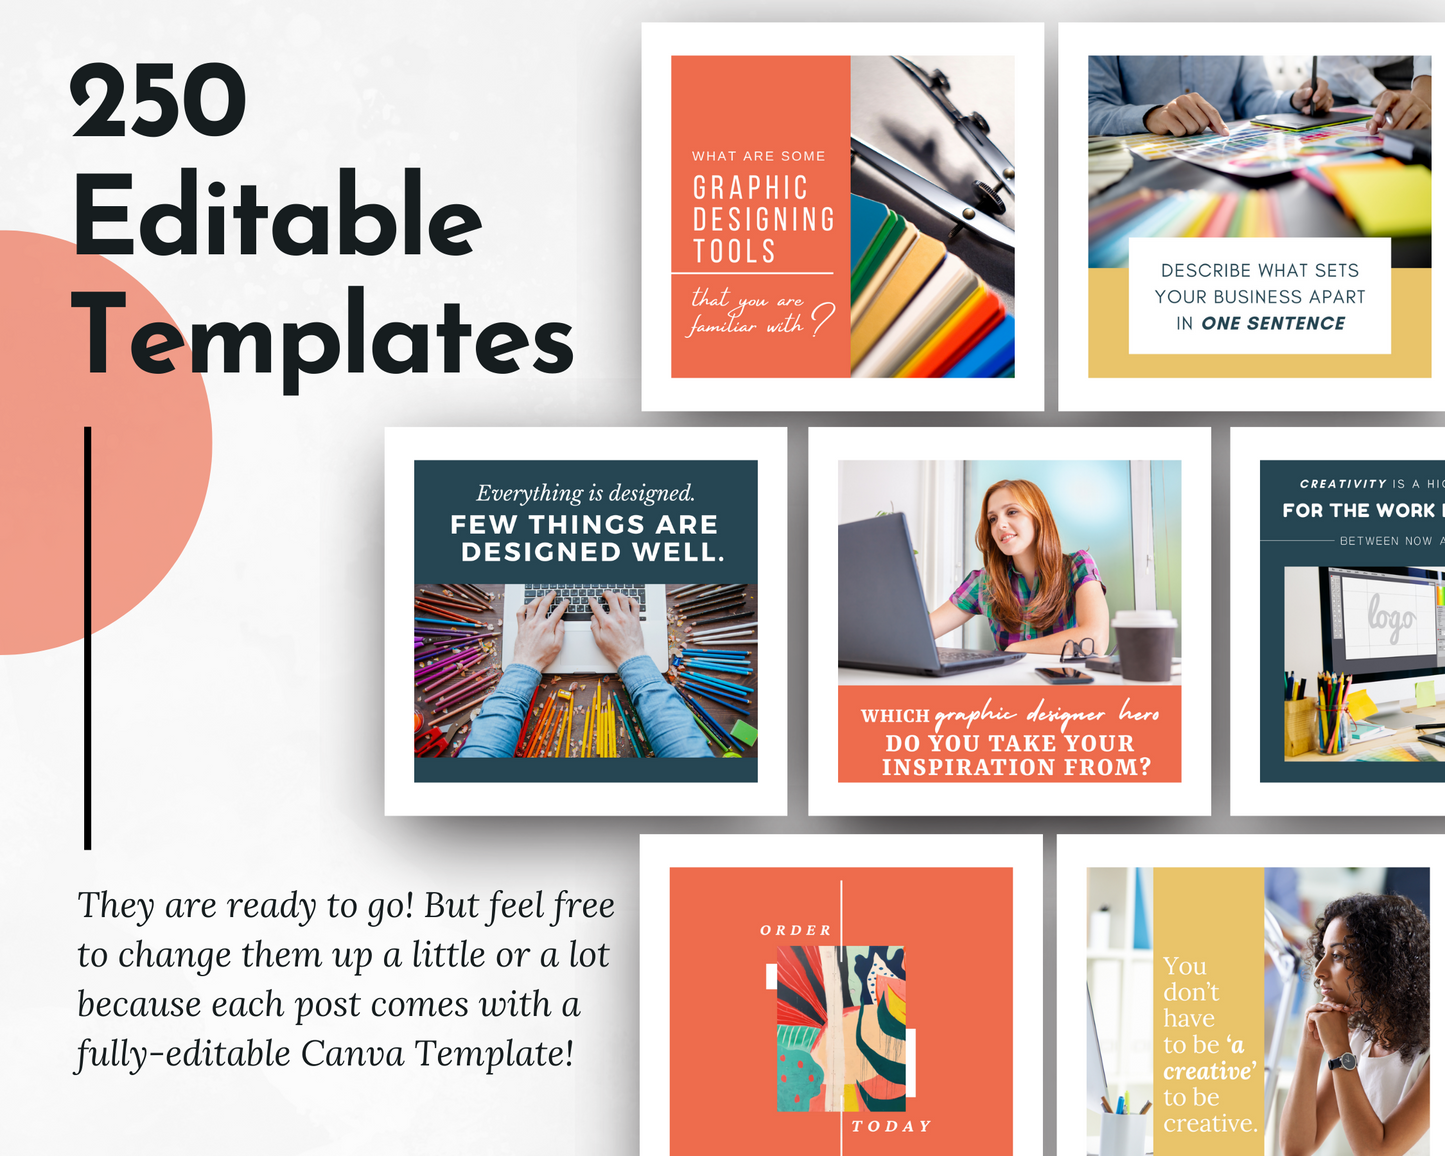 250 editable Instagram templates for Socially Inclined's Graphic Design Social Media Post Bundle with Canva Templates.